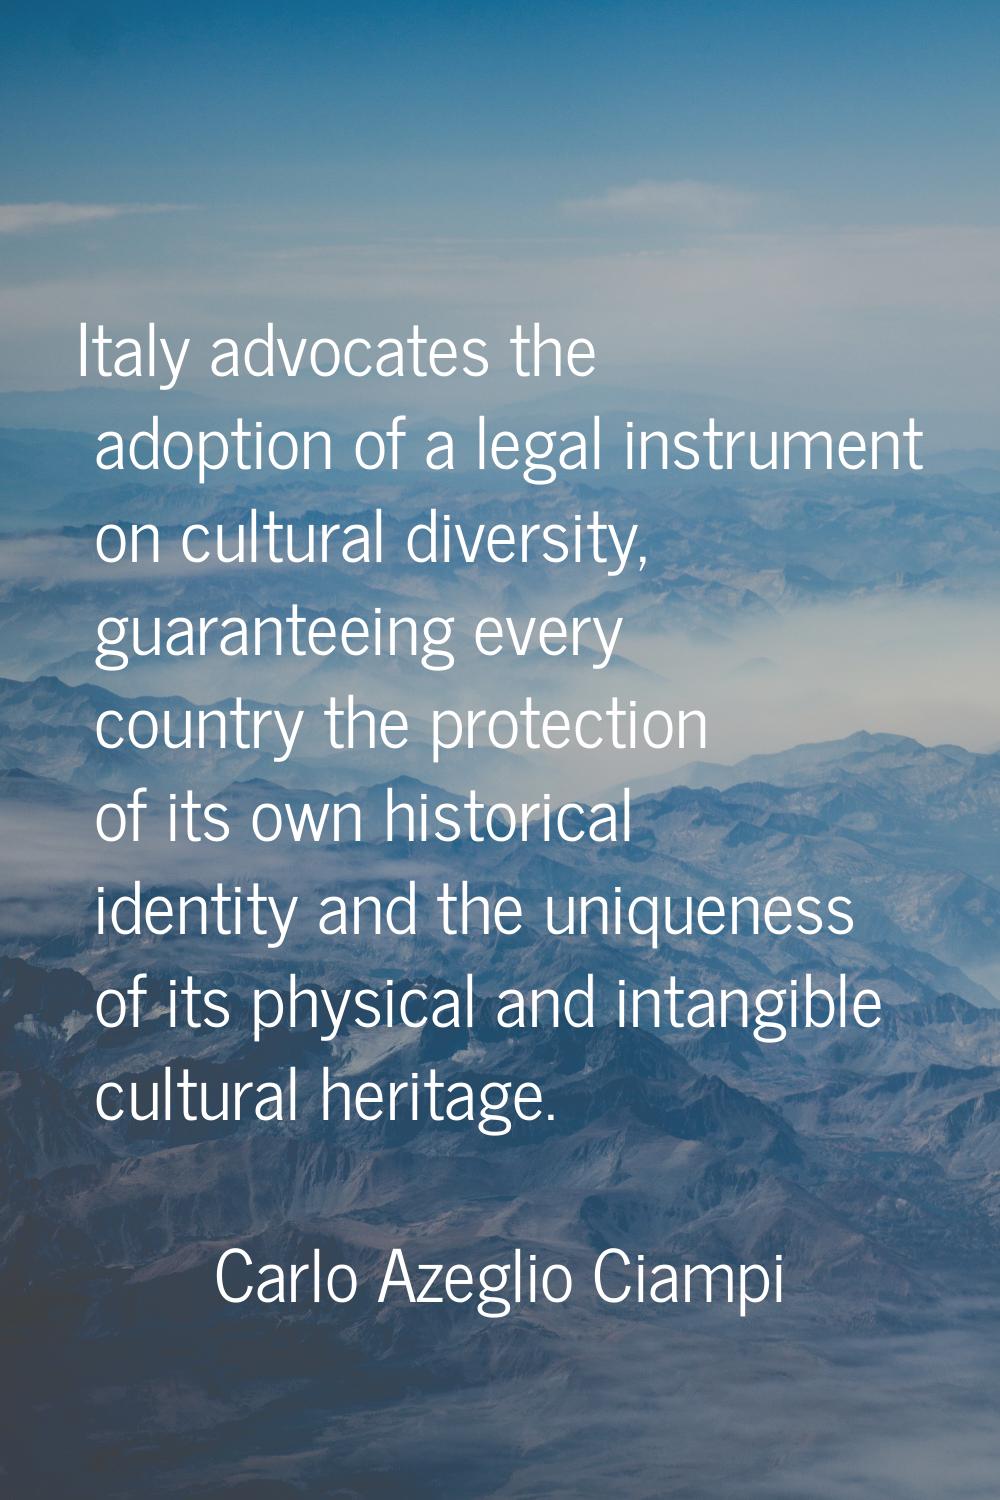 Italy advocates the adoption of a legal instrument on cultural diversity, guaranteeing every countr